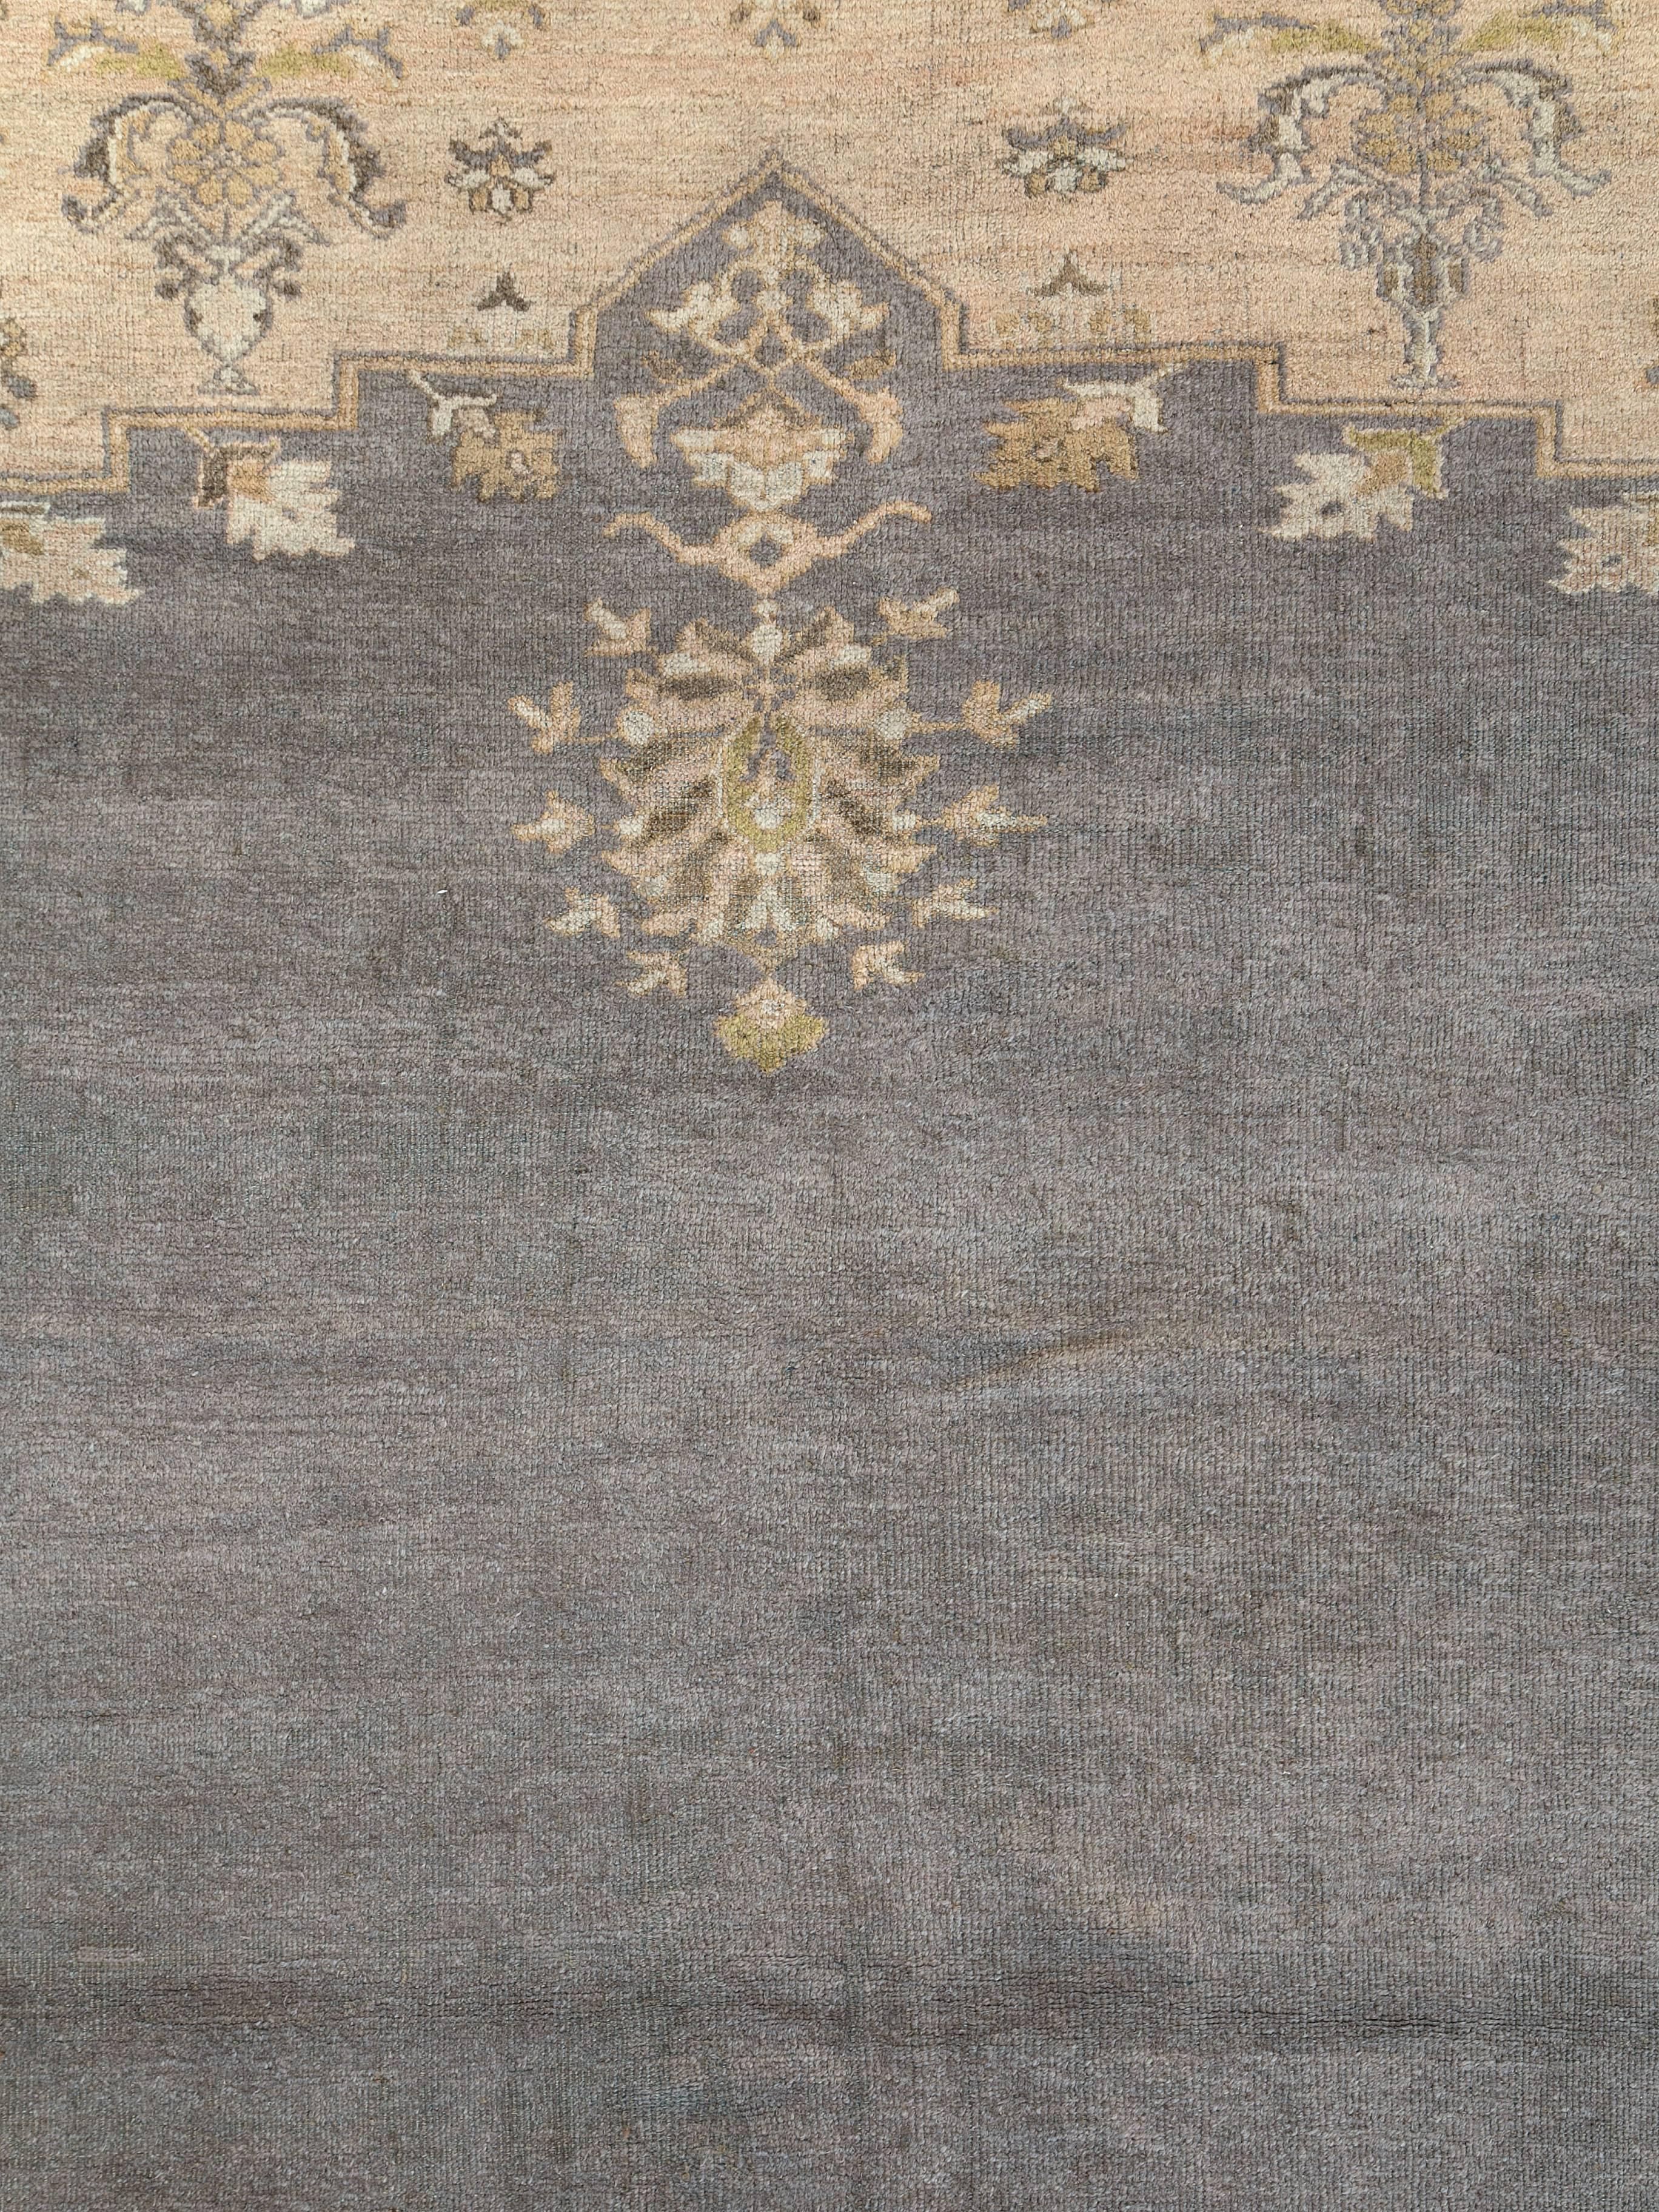 A European inspired antique Persian Mahal carpet from the second quarter of the 20th century.